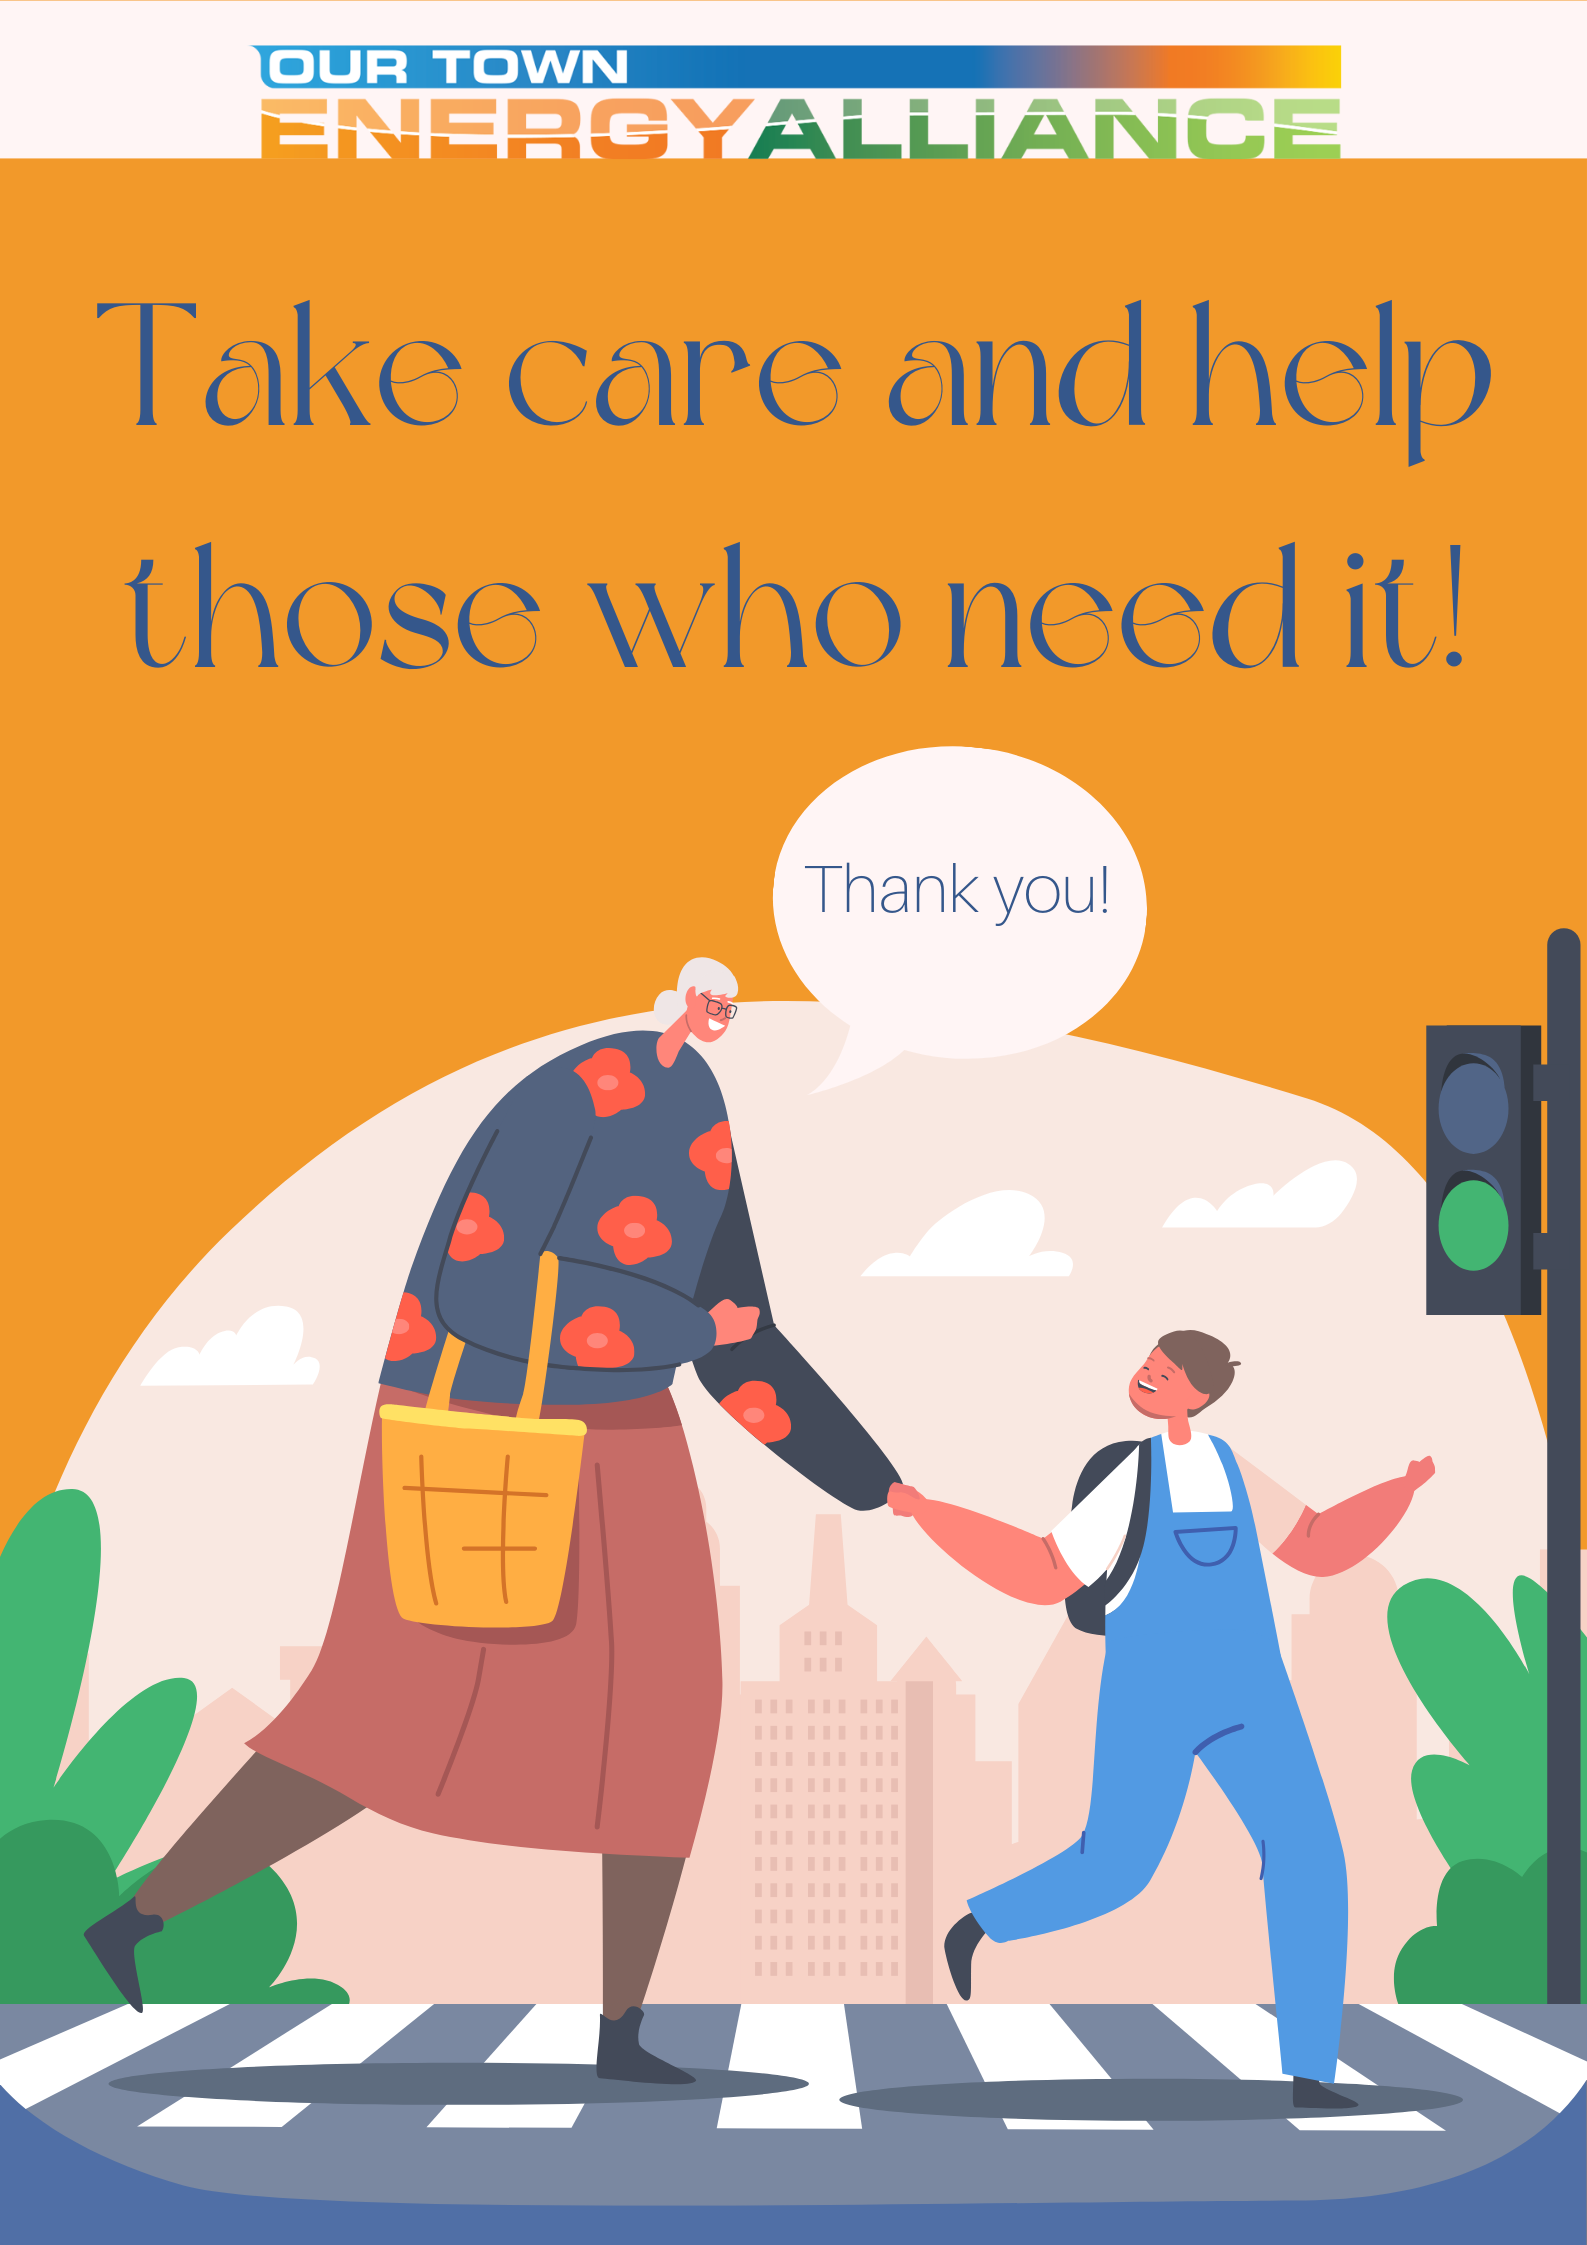 Take care and help those who need it